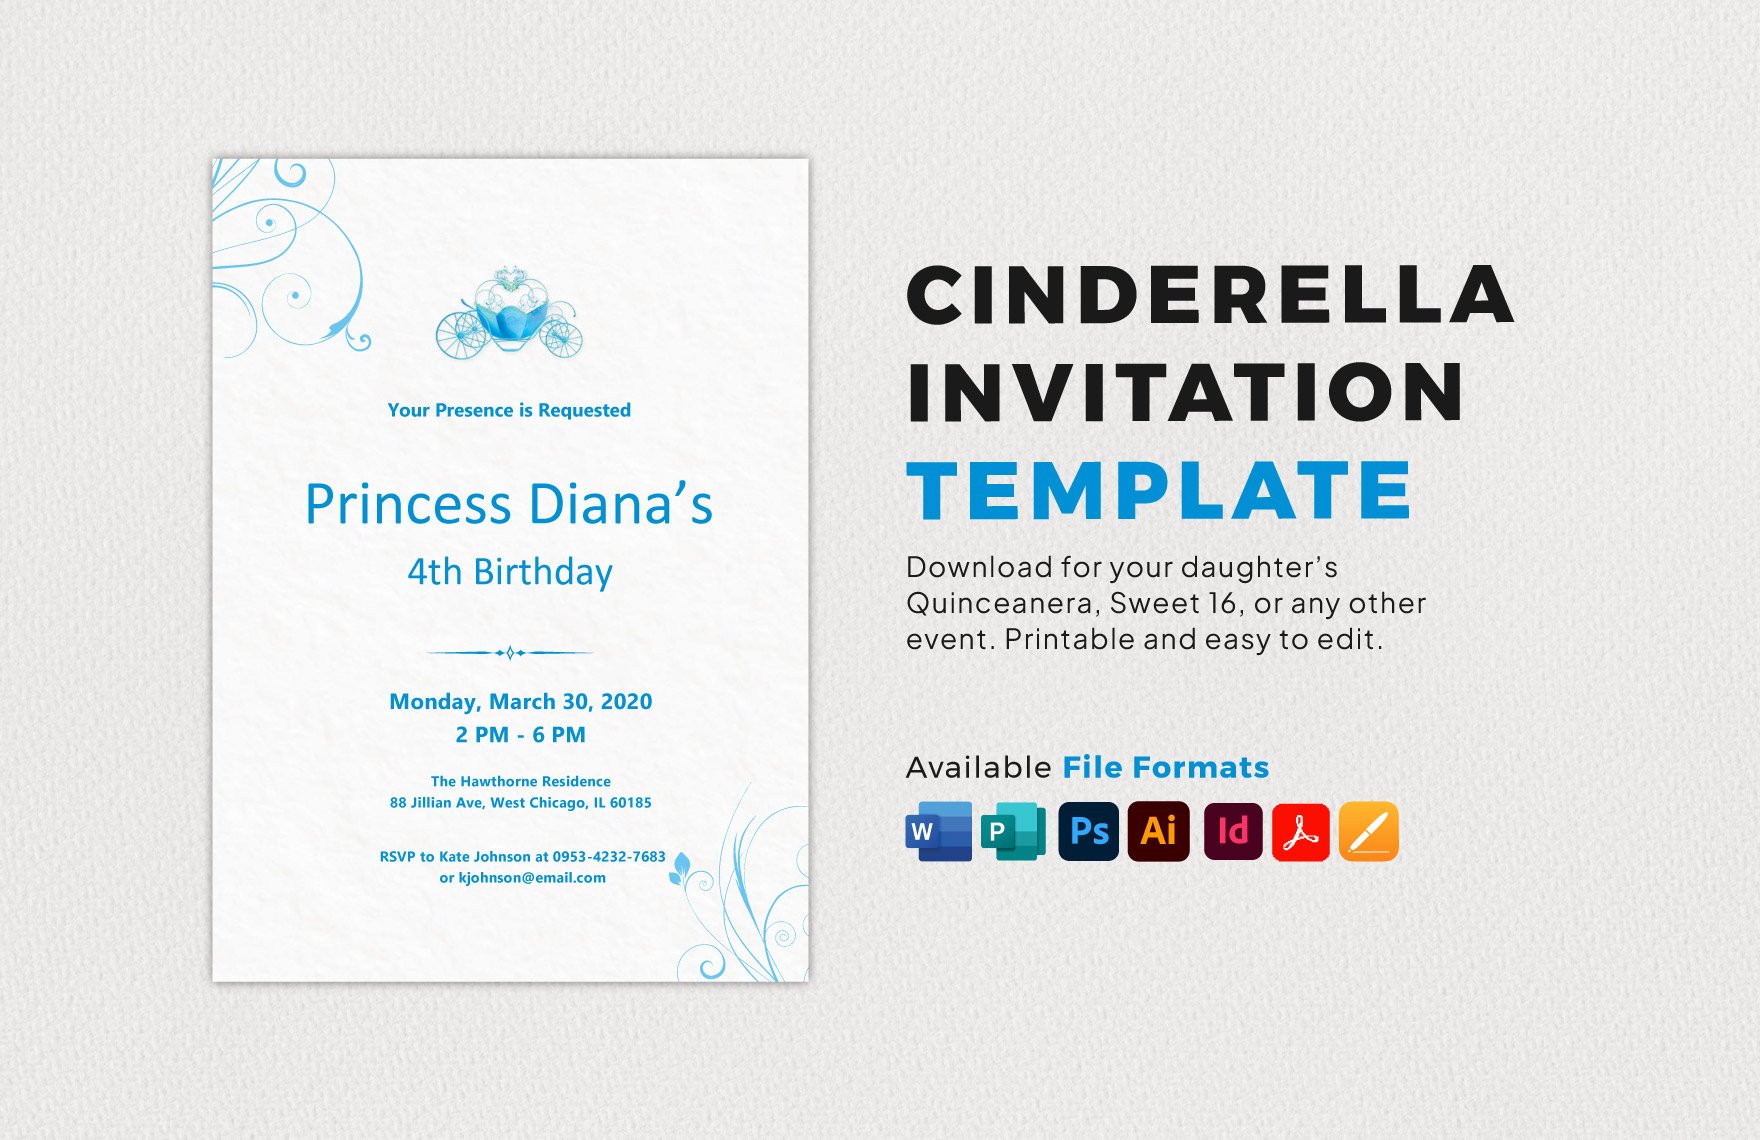 Cinderella Invitation Template in Word, PDF, Illustrator, PSD, Apple Pages, Publisher, InDesign